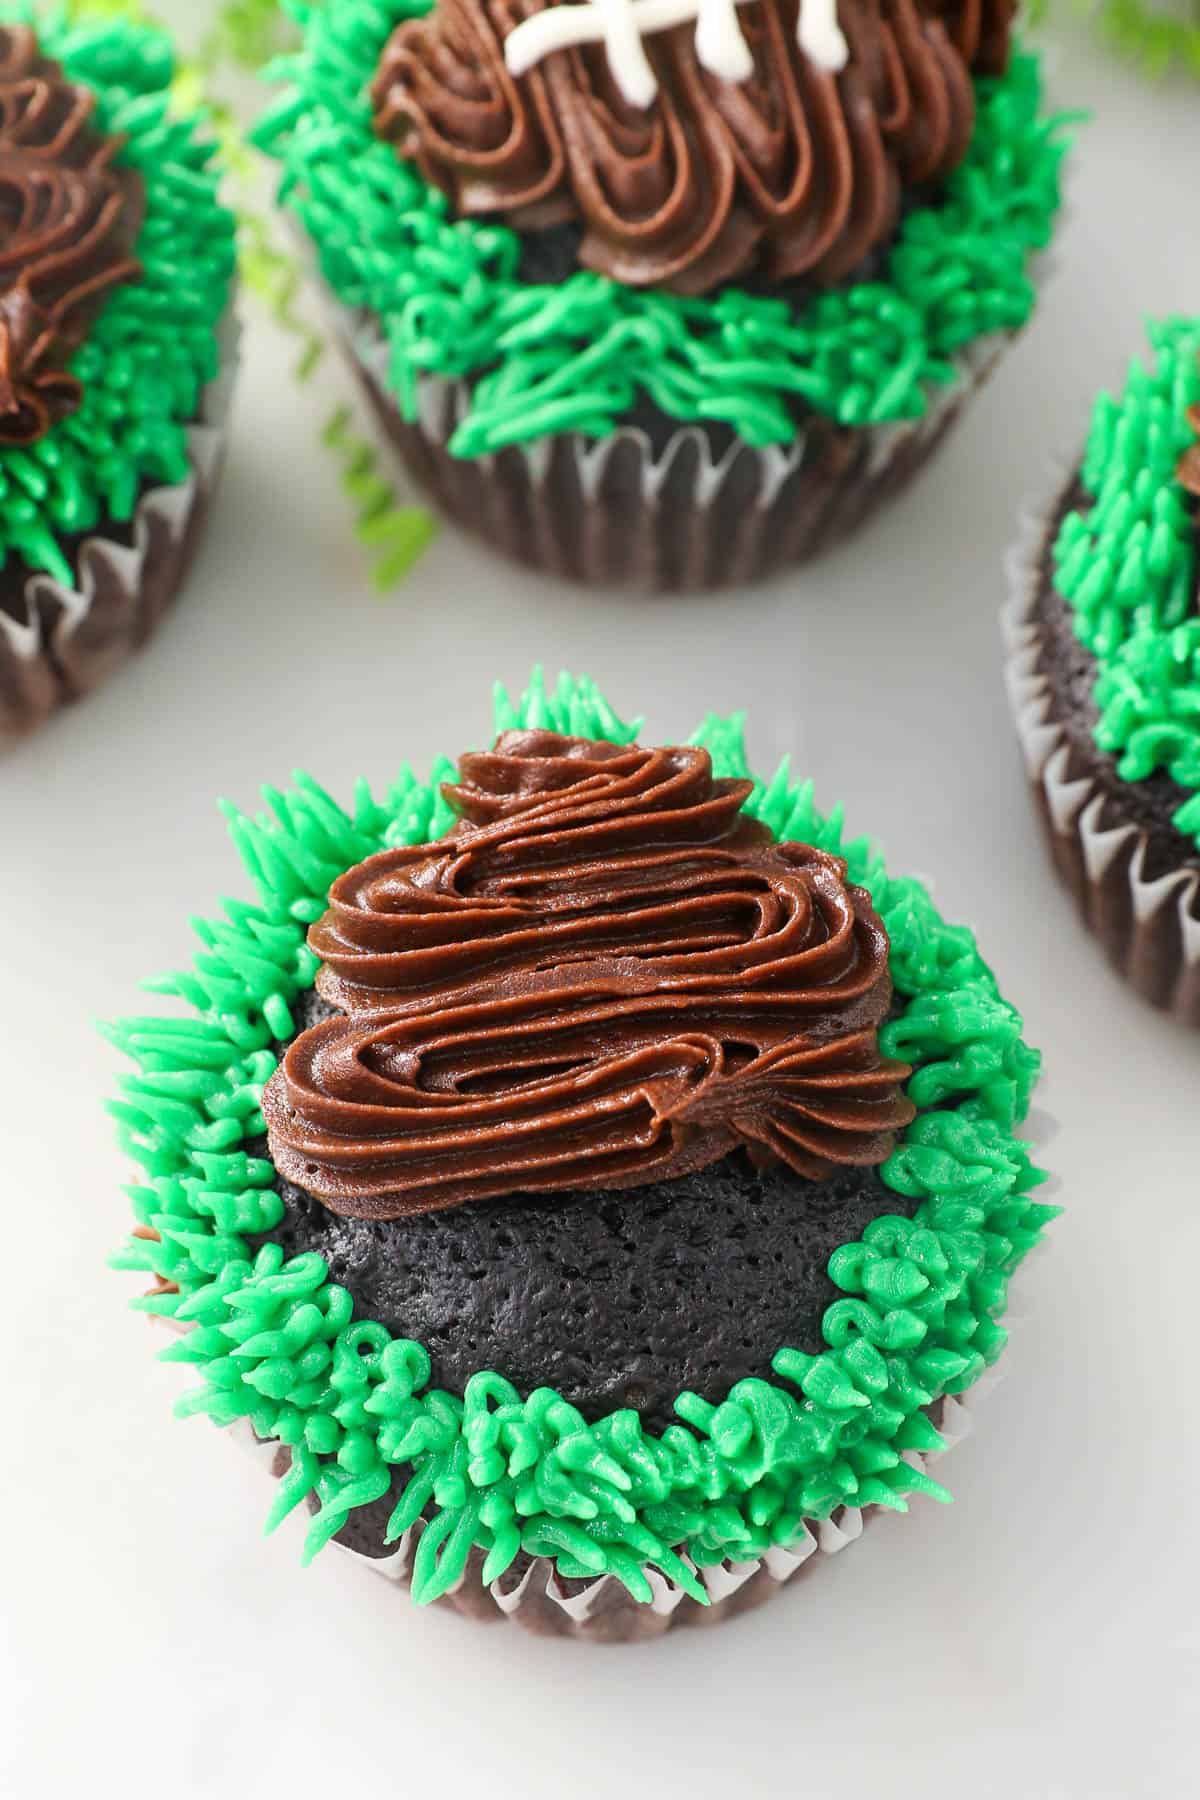 Brown frosting piped over a chocolate cupcake to form the shape of a football, surrounded by green piped frosting grass.